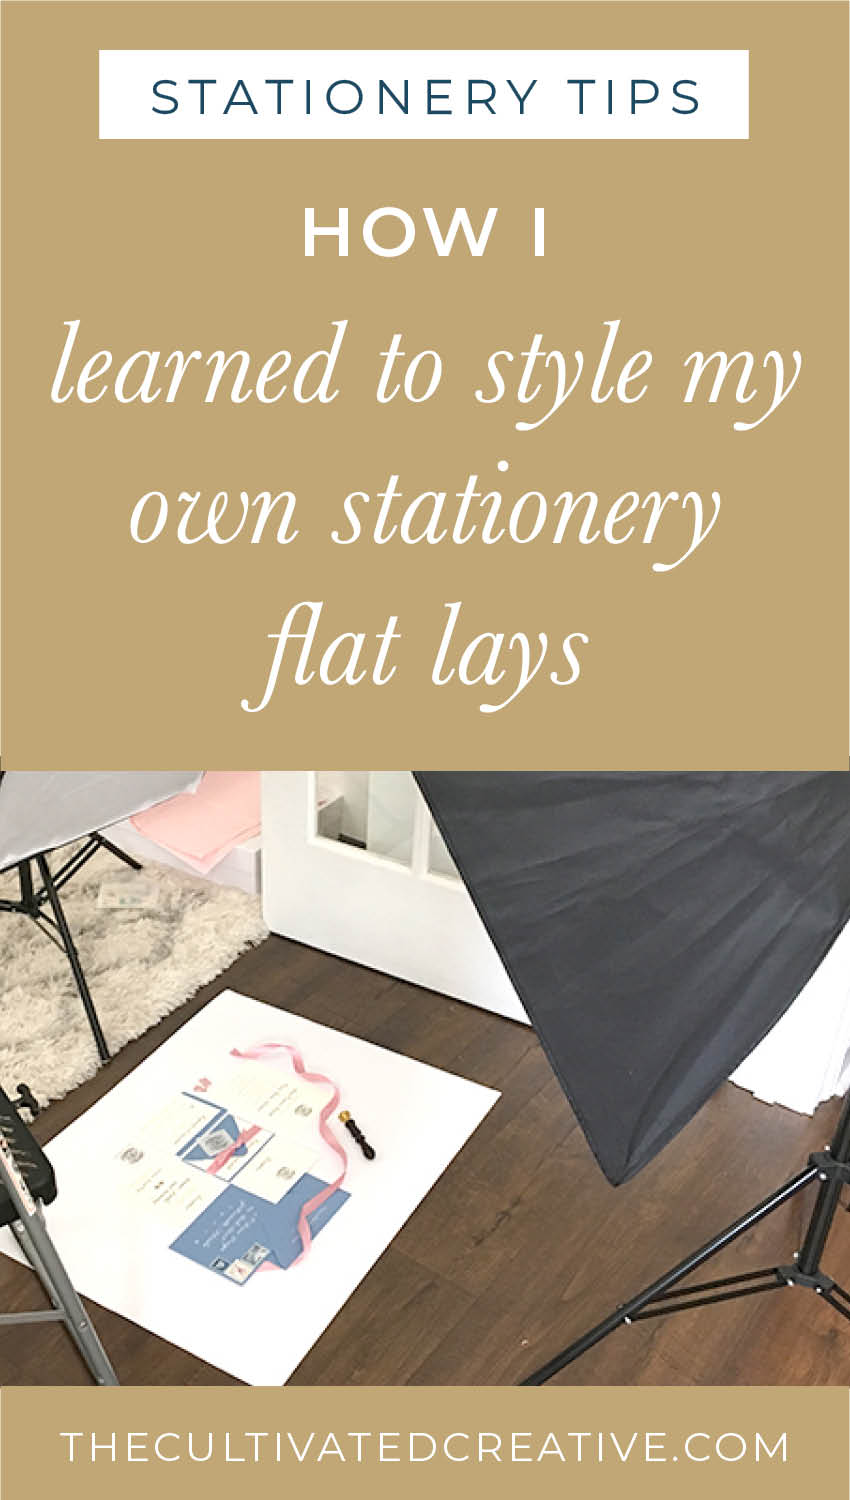 How I learned to style and photograph my own stationery flat lays | what props I use for my stationery pictures